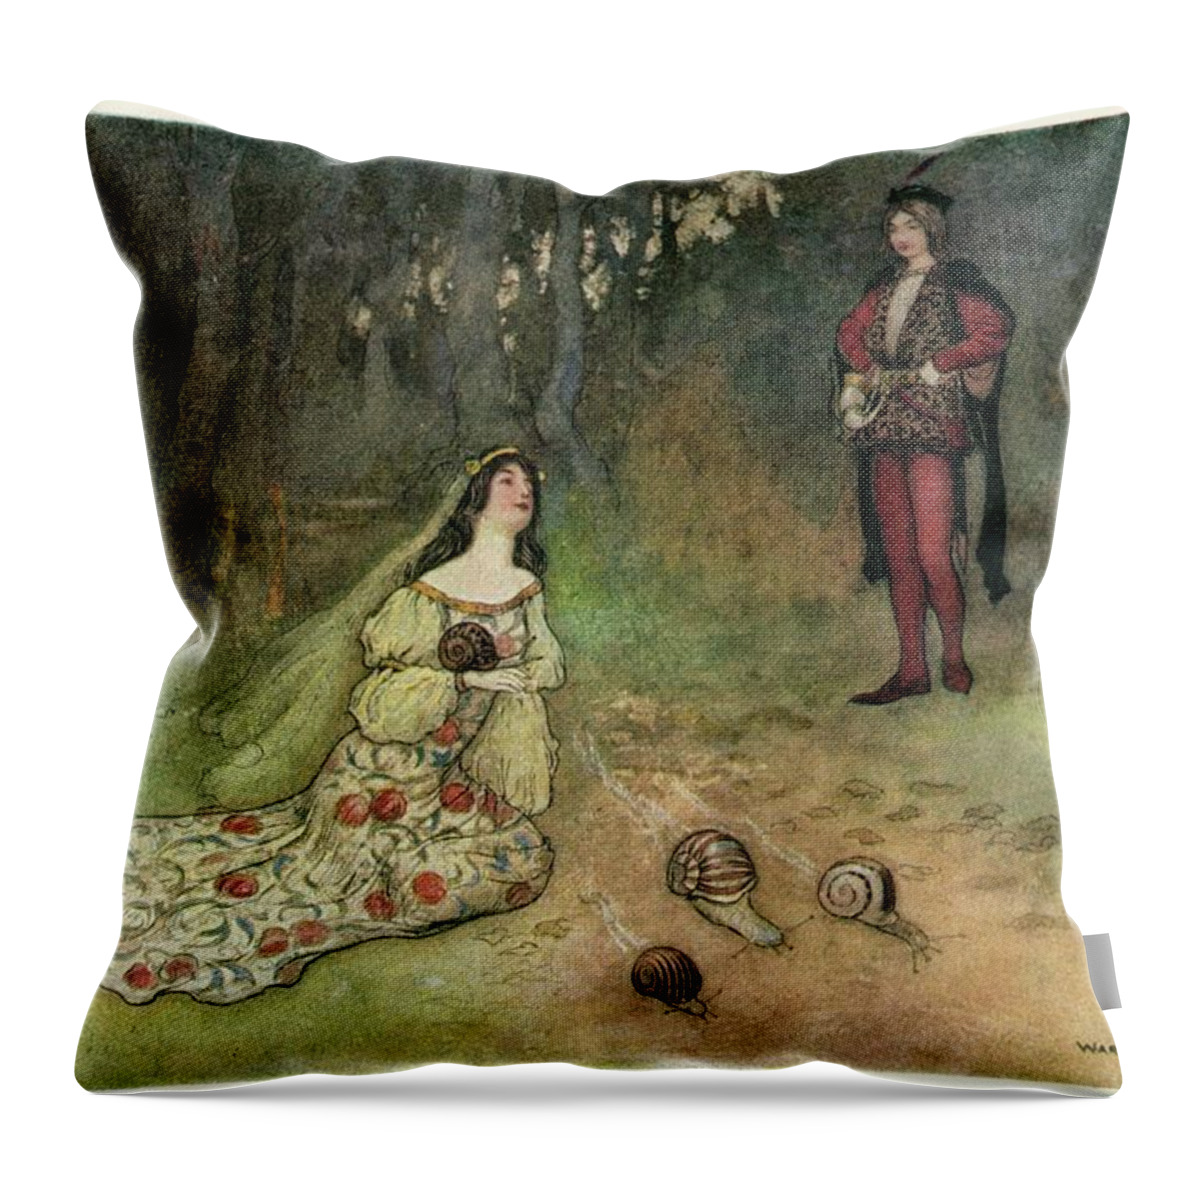 Medieval Throw Pillow featuring the painting The Prince And Filadoro With The Snails by Warwick Goble